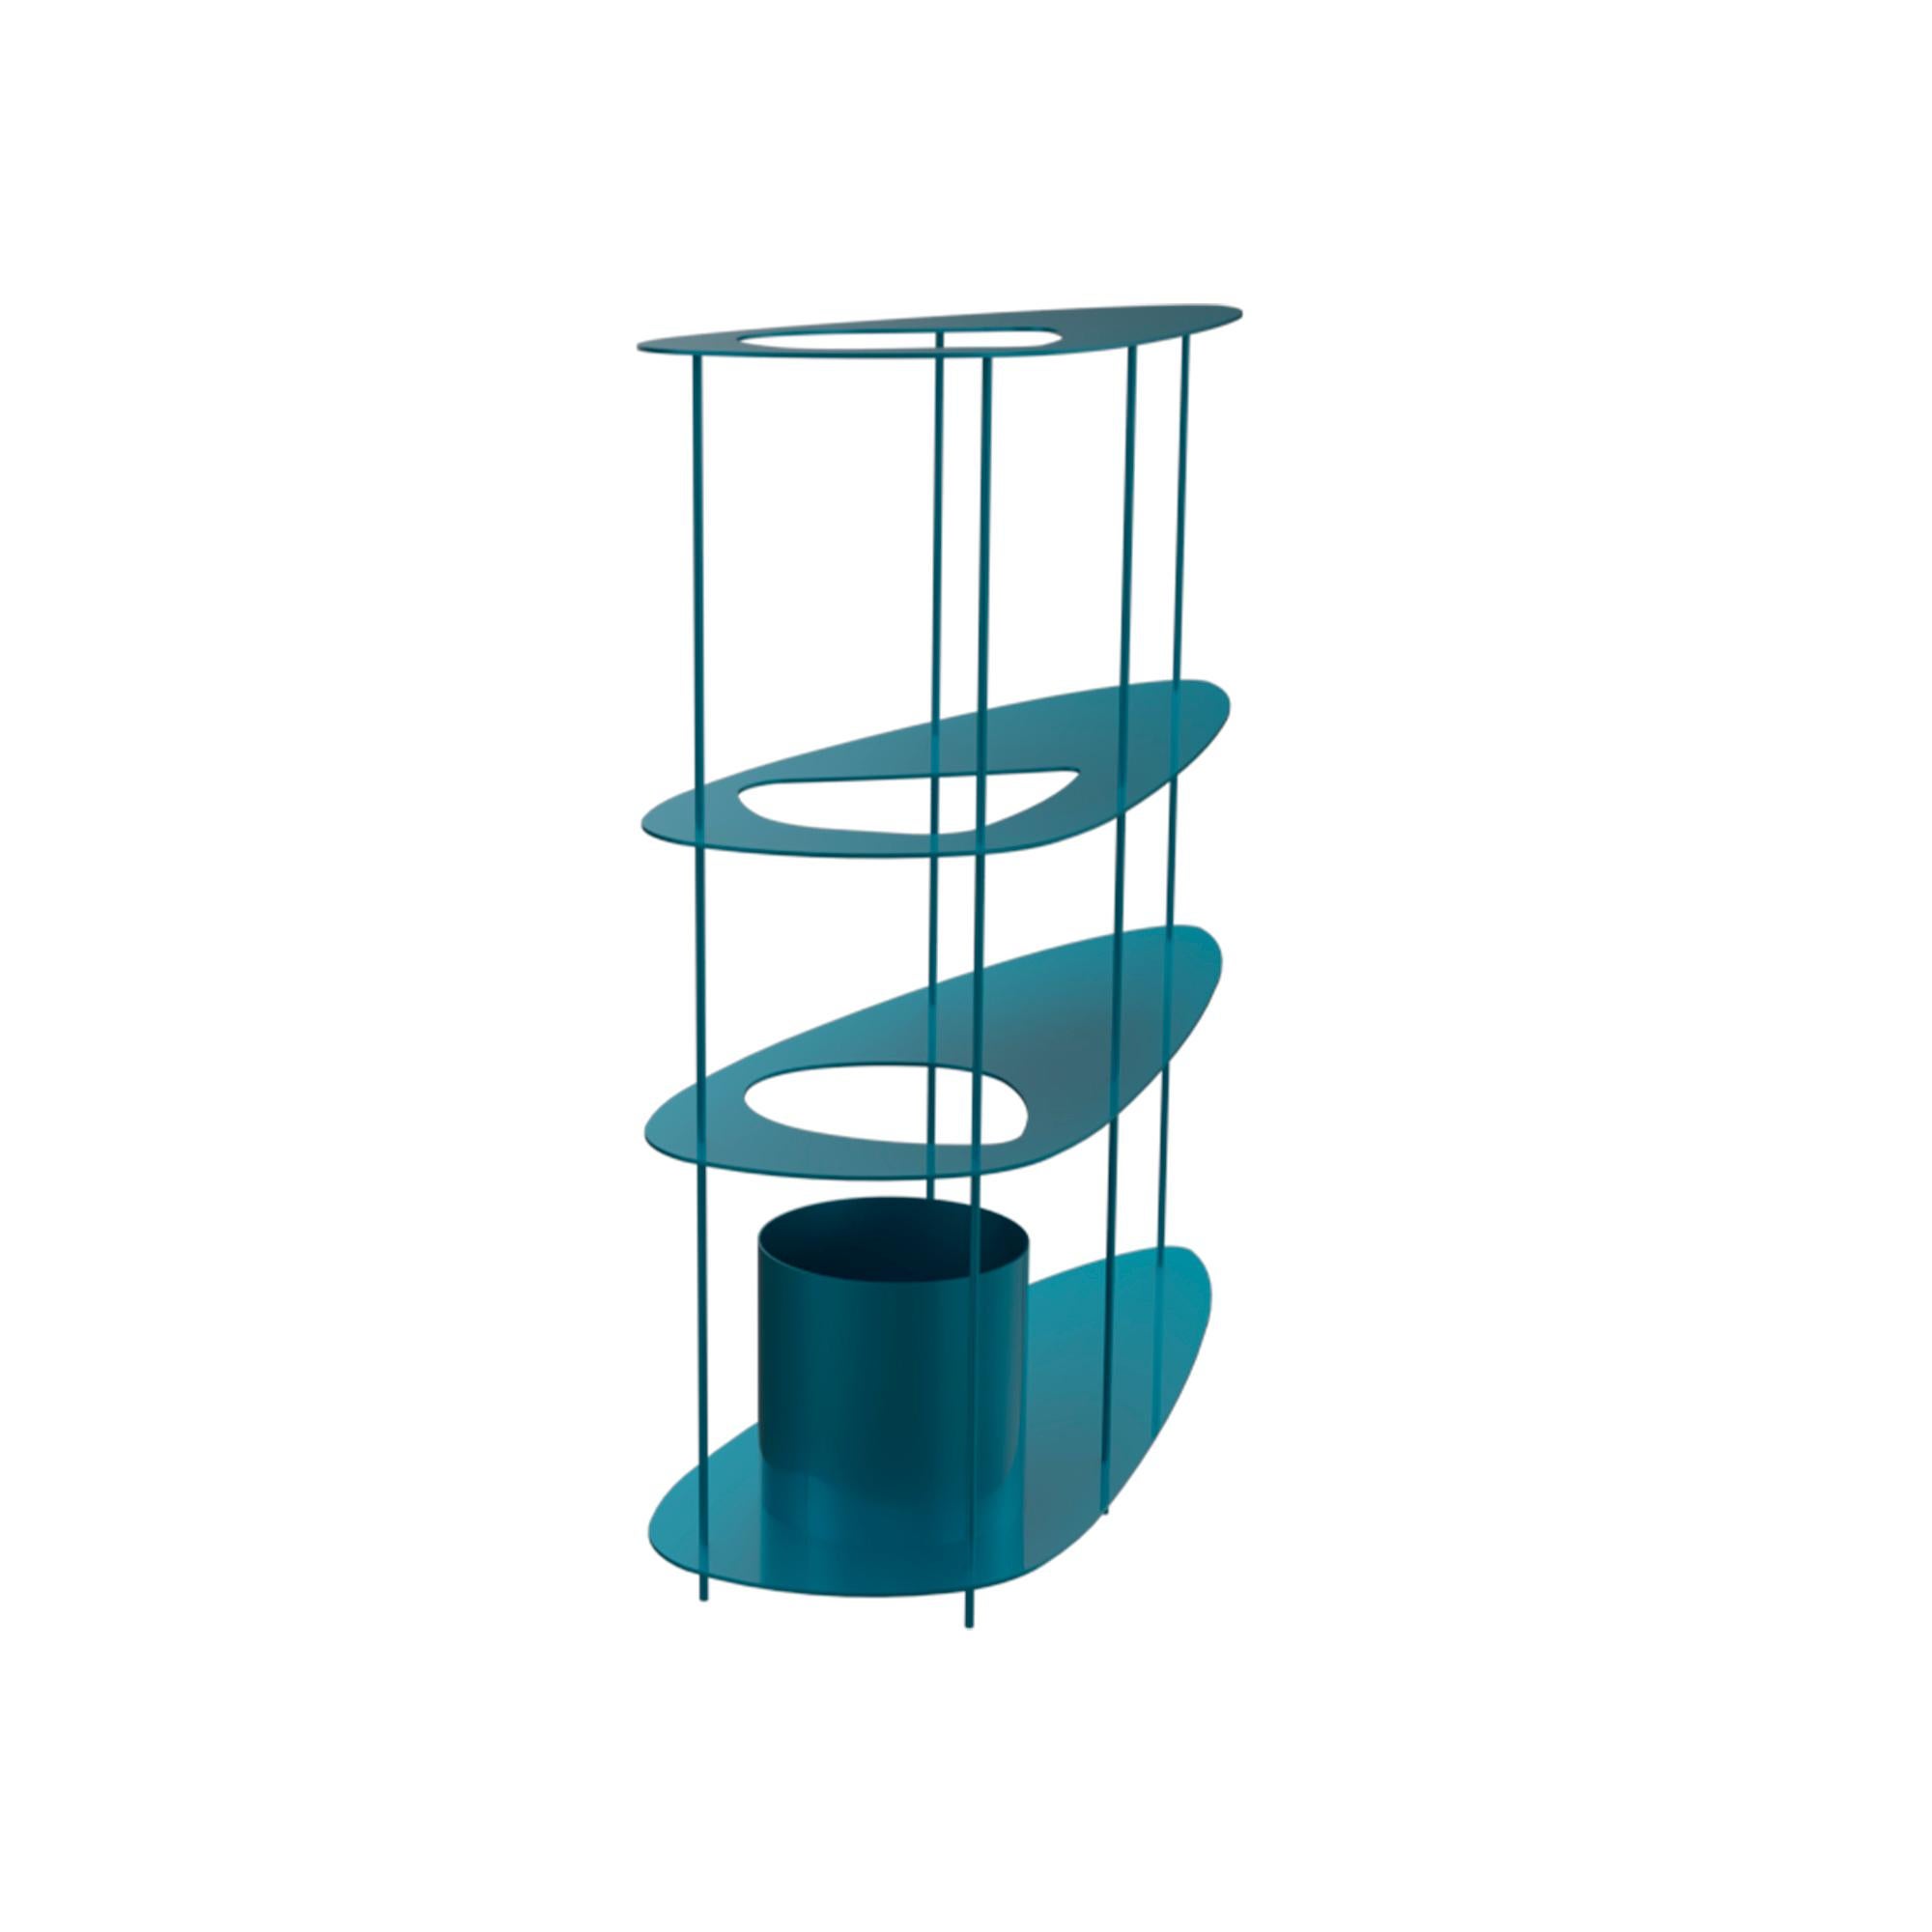 Oasi is a stunning aluminum sideboard with a design as decisive as it is a linear silhouette. Marked by sleek volumes in a teal-blue finish, the leaf-shaped shelves with irregular cutouts are arranged on four tiers, supported by five dainty rods. A